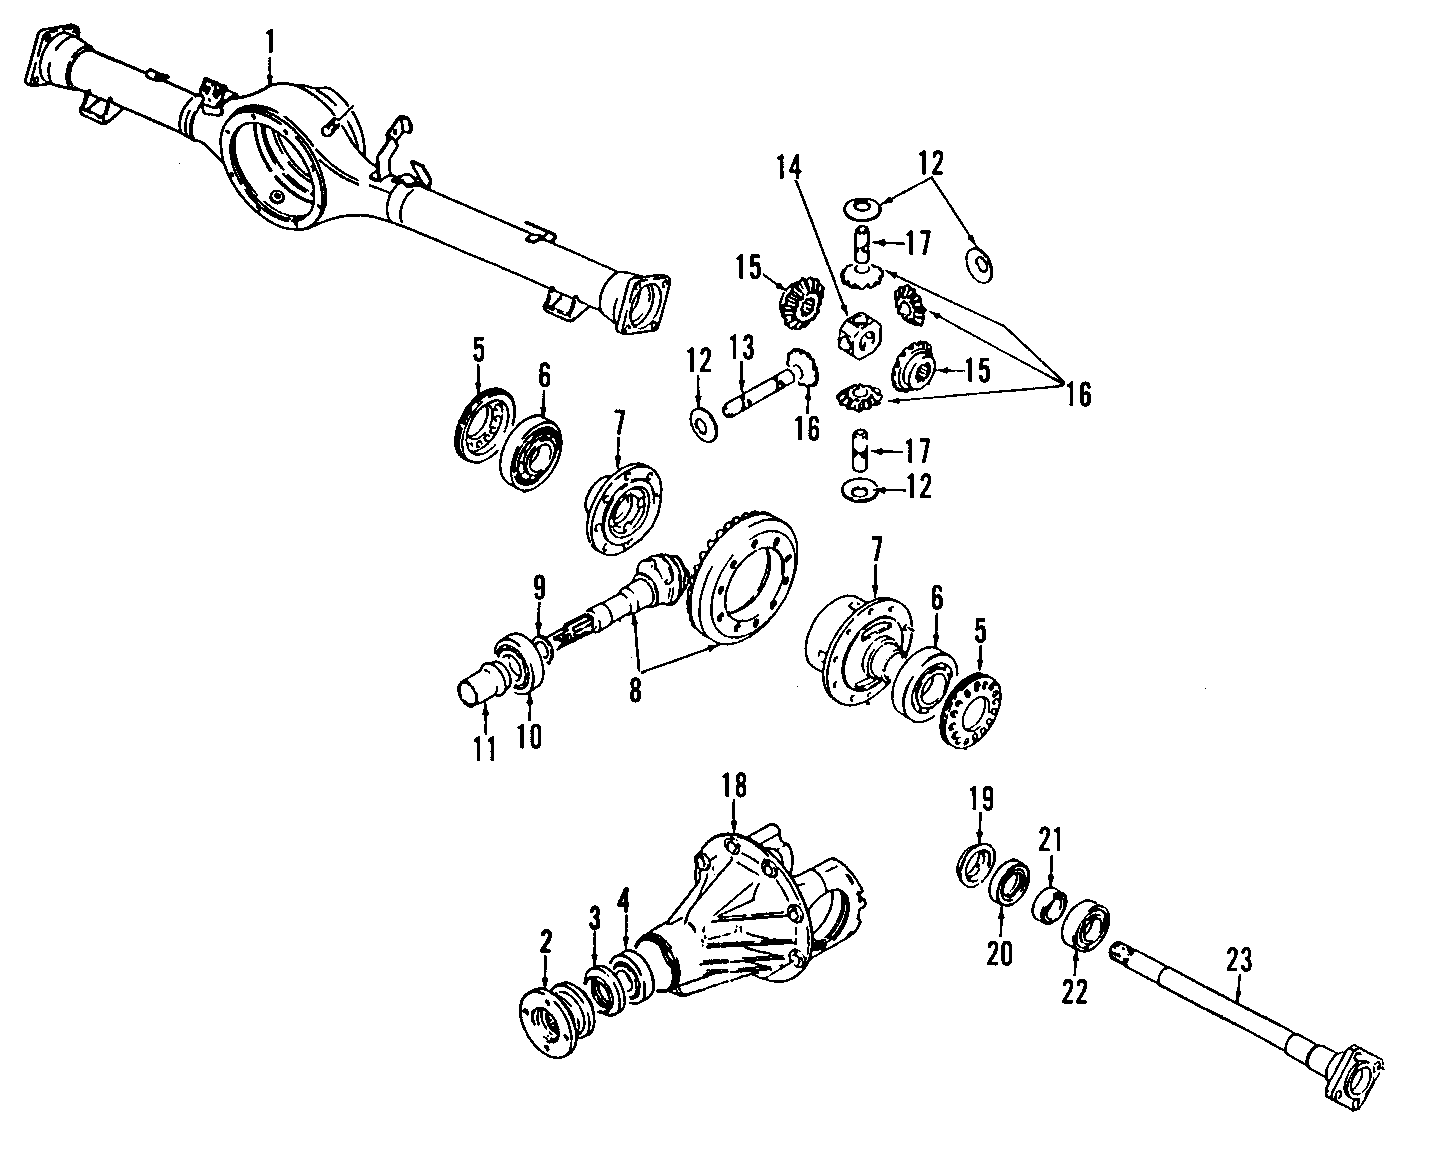 17REAR AXLE. DIFFERENTIAL. PROPELLER SHAFT.https://images.simplepart.com/images/parts/motor/fullsize/T011110.png